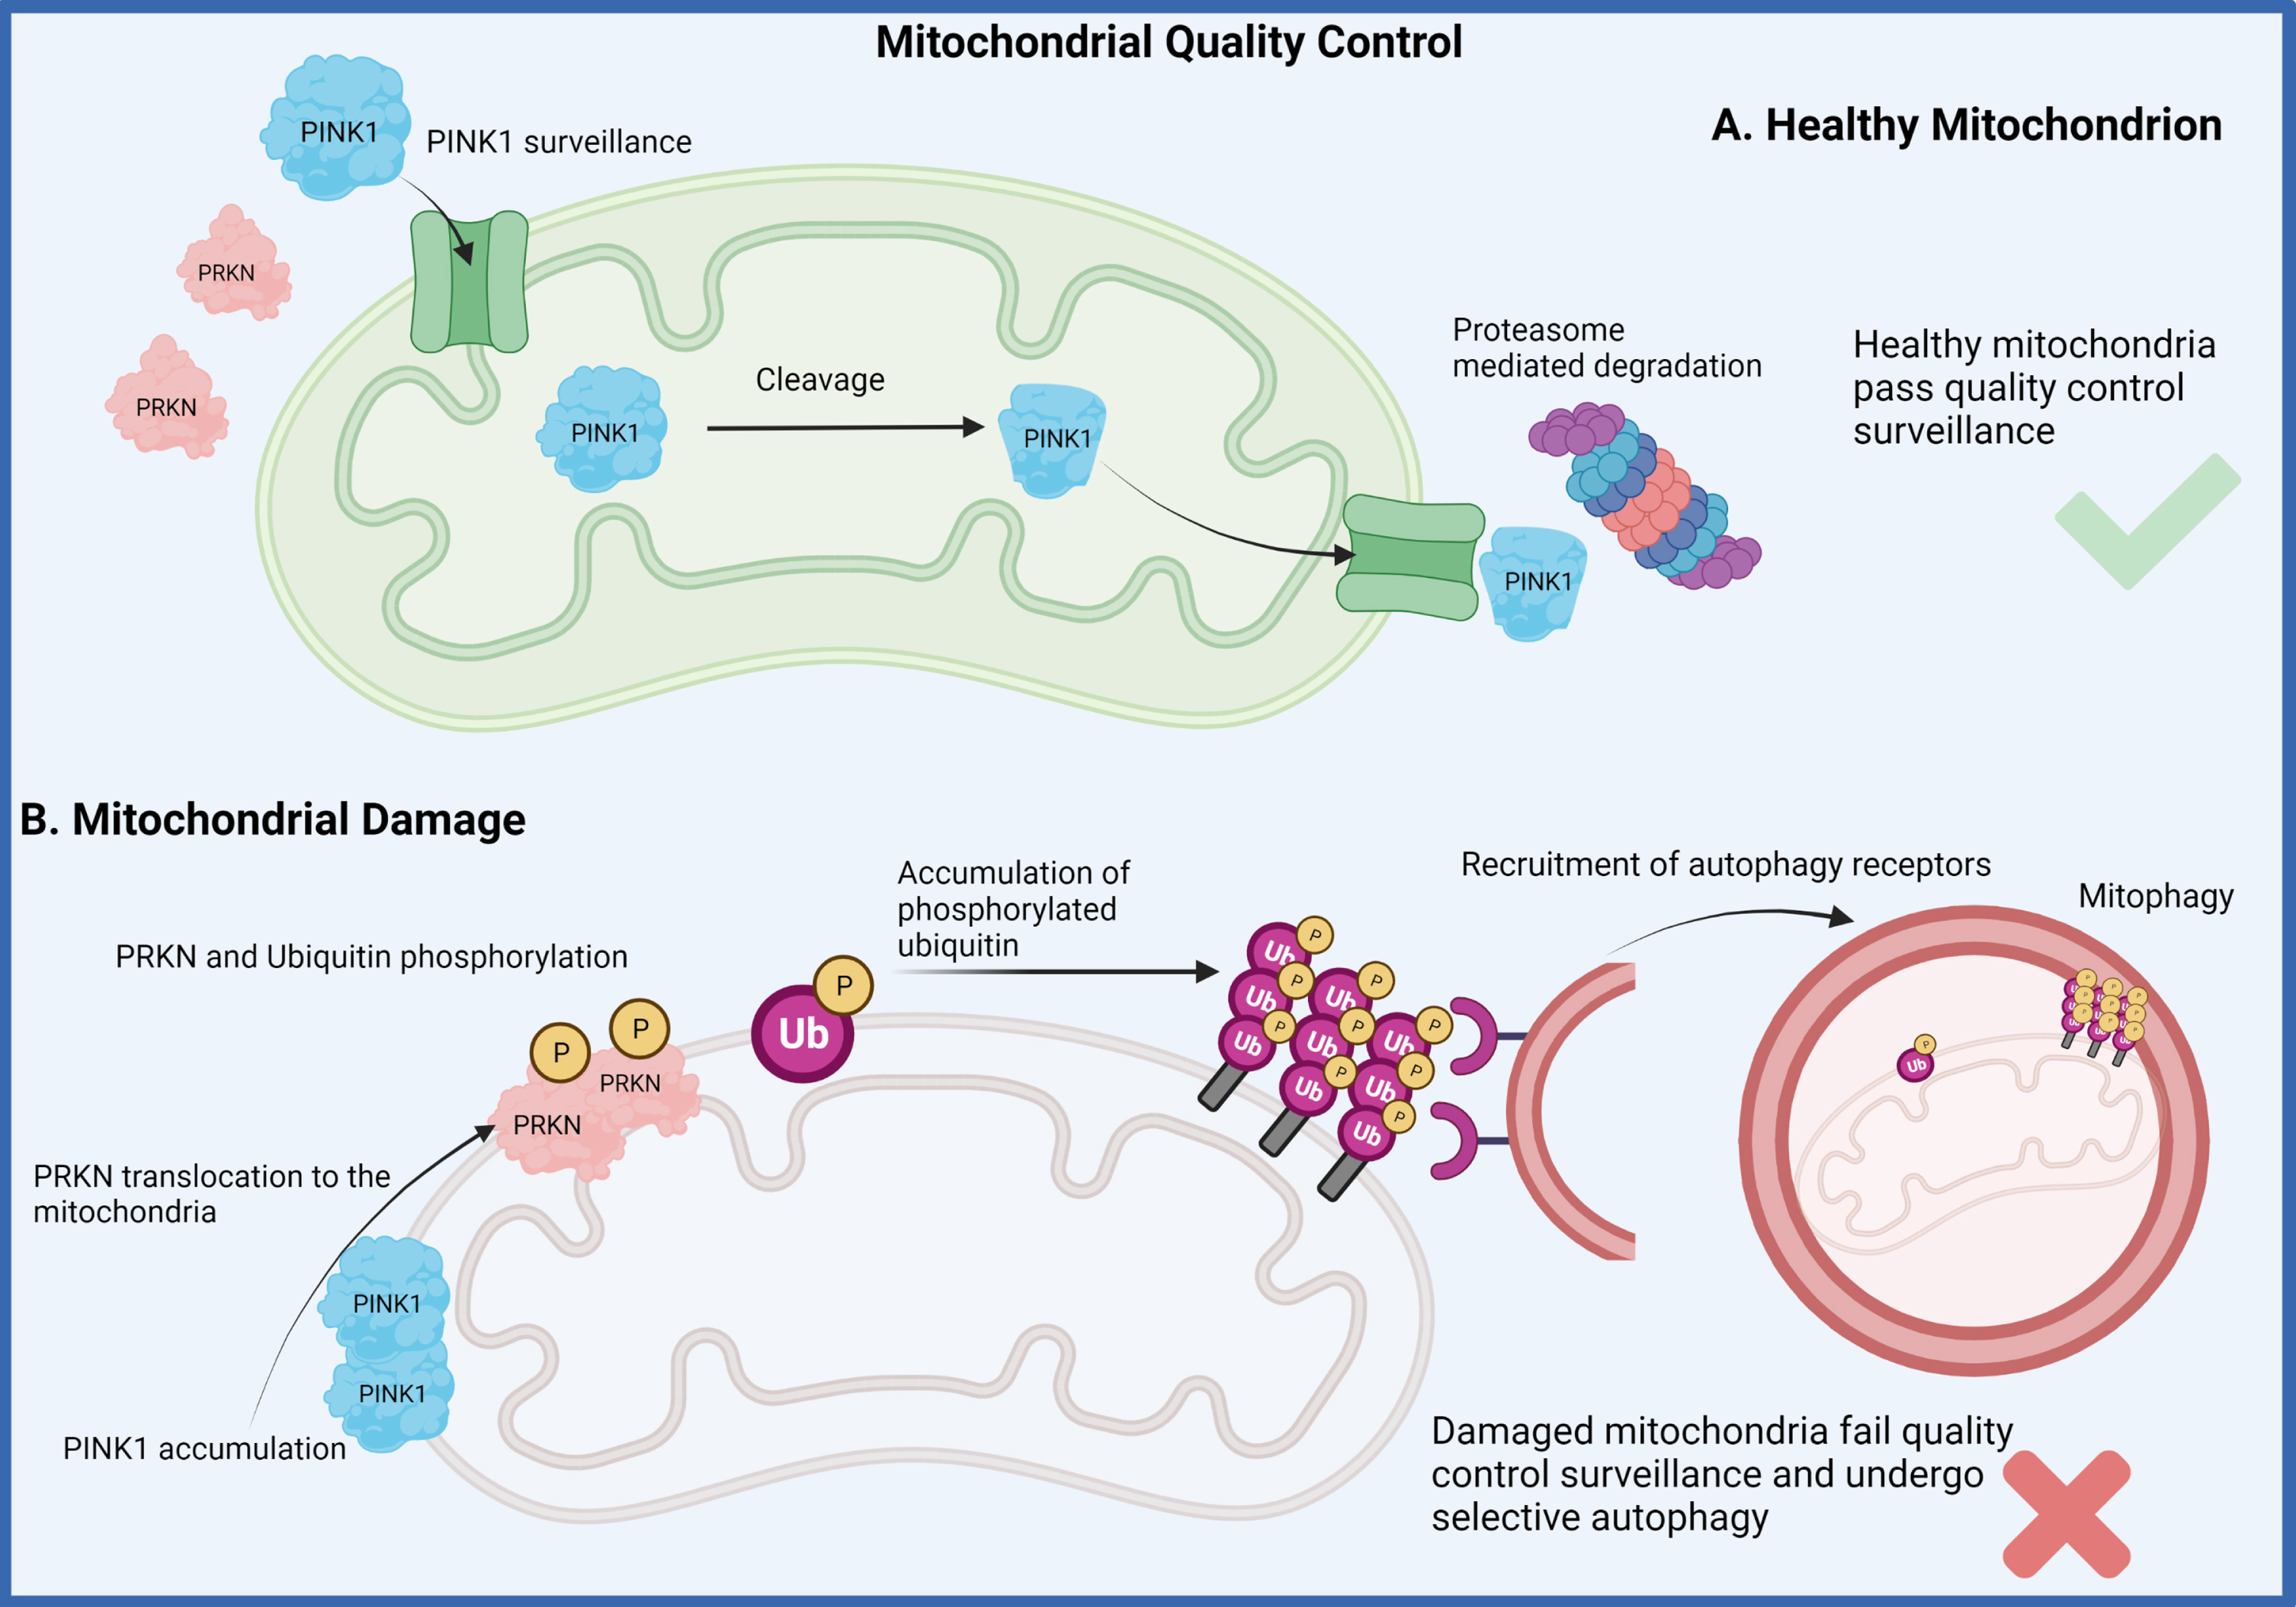 Mitophagy pathway. Two of the genes that have been identified to drive early-onset recessive forms of Parkinson’s disease have been demonstrated to play a major role in mitochondrial quality control measures of healthy mitochondria (A). The recessive loss of function for either the PINK1 or “PARKIN (PRKN)” proteins disrupts the normal mitochondrial surveillance process which induces the process of mitophagy for clearance of the damaged organelle (B). This dysfunction is believed to lead to the accumulation of damaged mitochondria eventually resulting in neuronal death. (Created by BioRender.com)